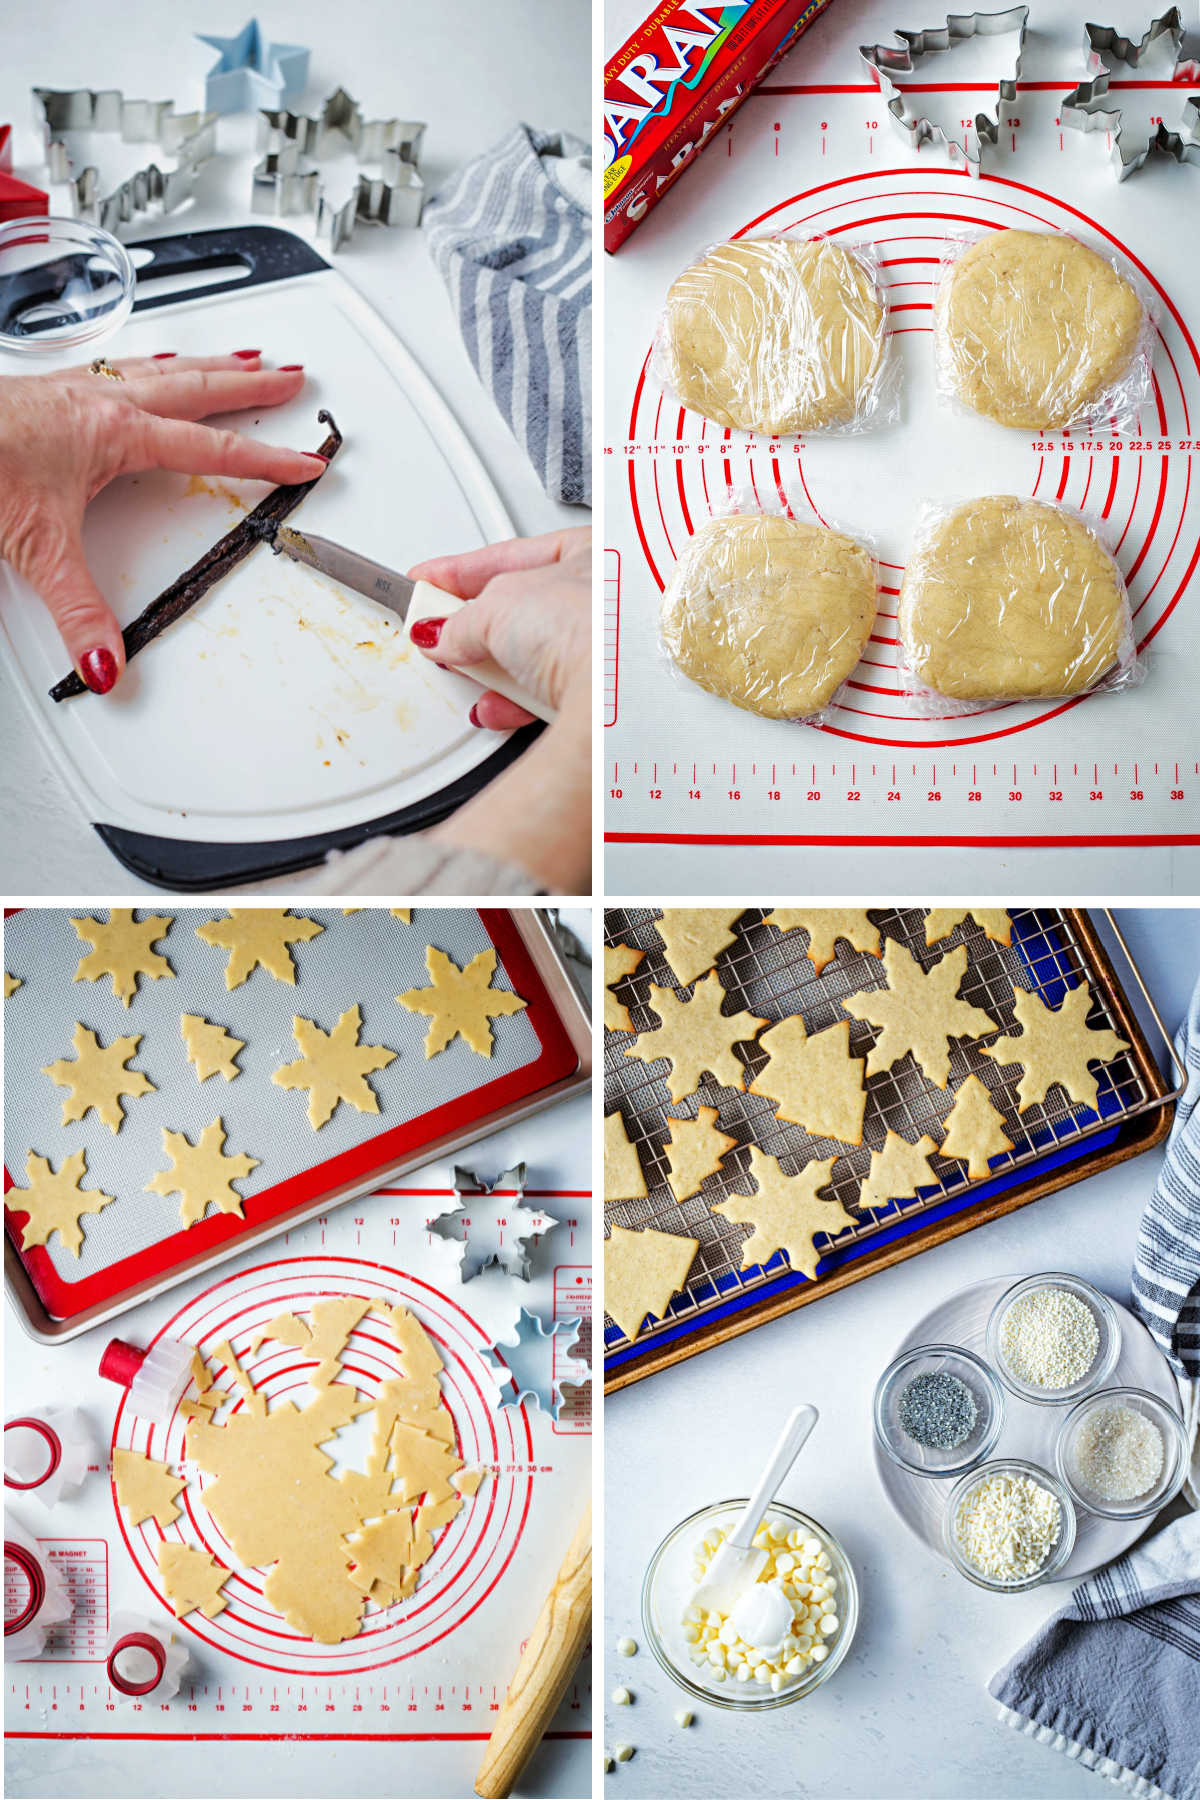 process steps for making vanilla cookies: remove seeds from vanilla bean; wrap discs of dough in plastic wrap; roll out dough and cut out; melt white chocolate chips for icing.